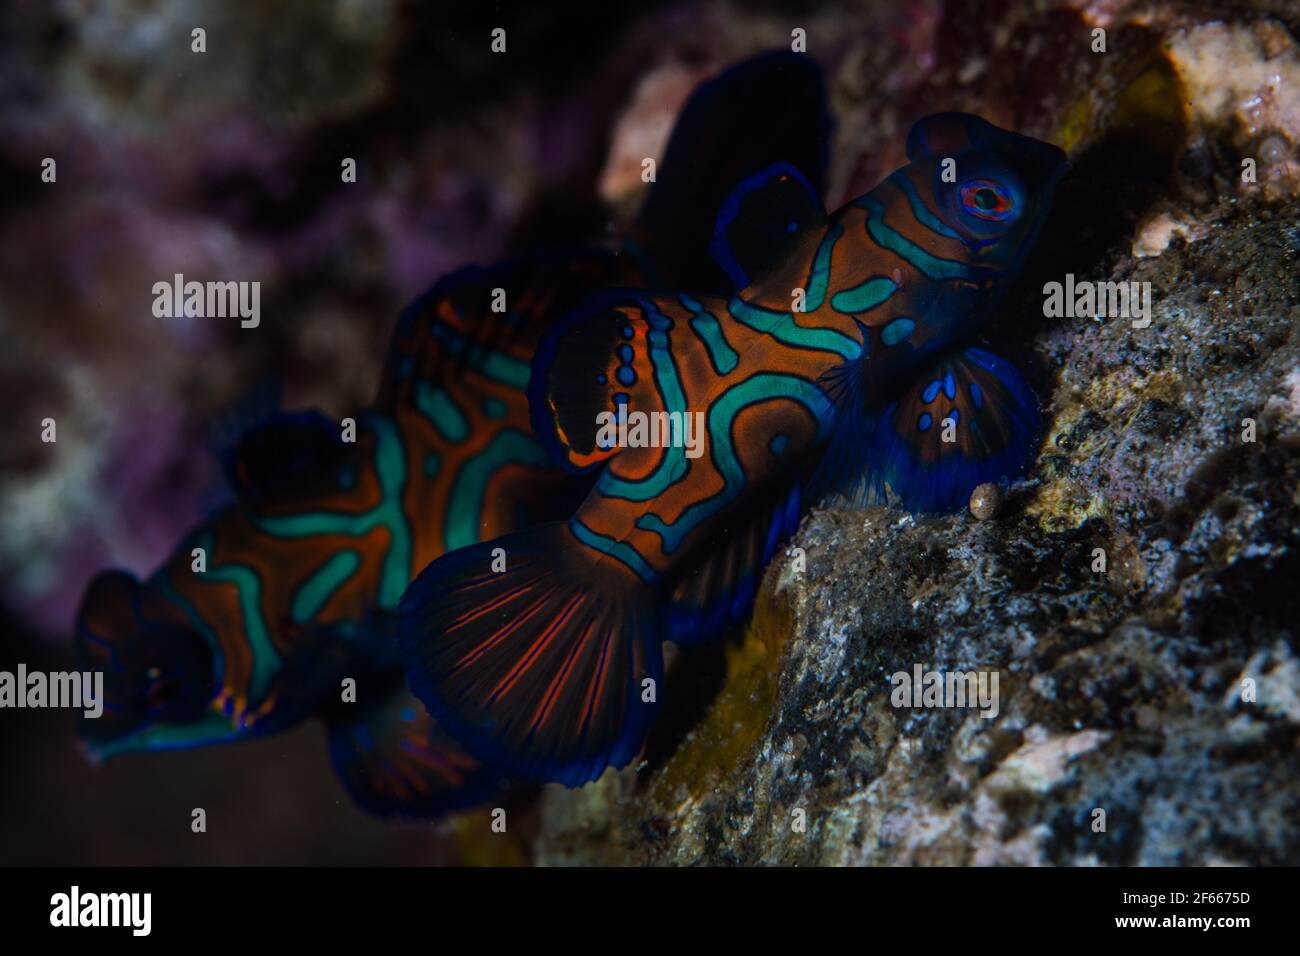 Mandarinfish, Pterosynchiropus splendidus, swim over a rubble seafloor in Indonesia. These beautiful fish are native to the Coral Triangle region. Stock Photo